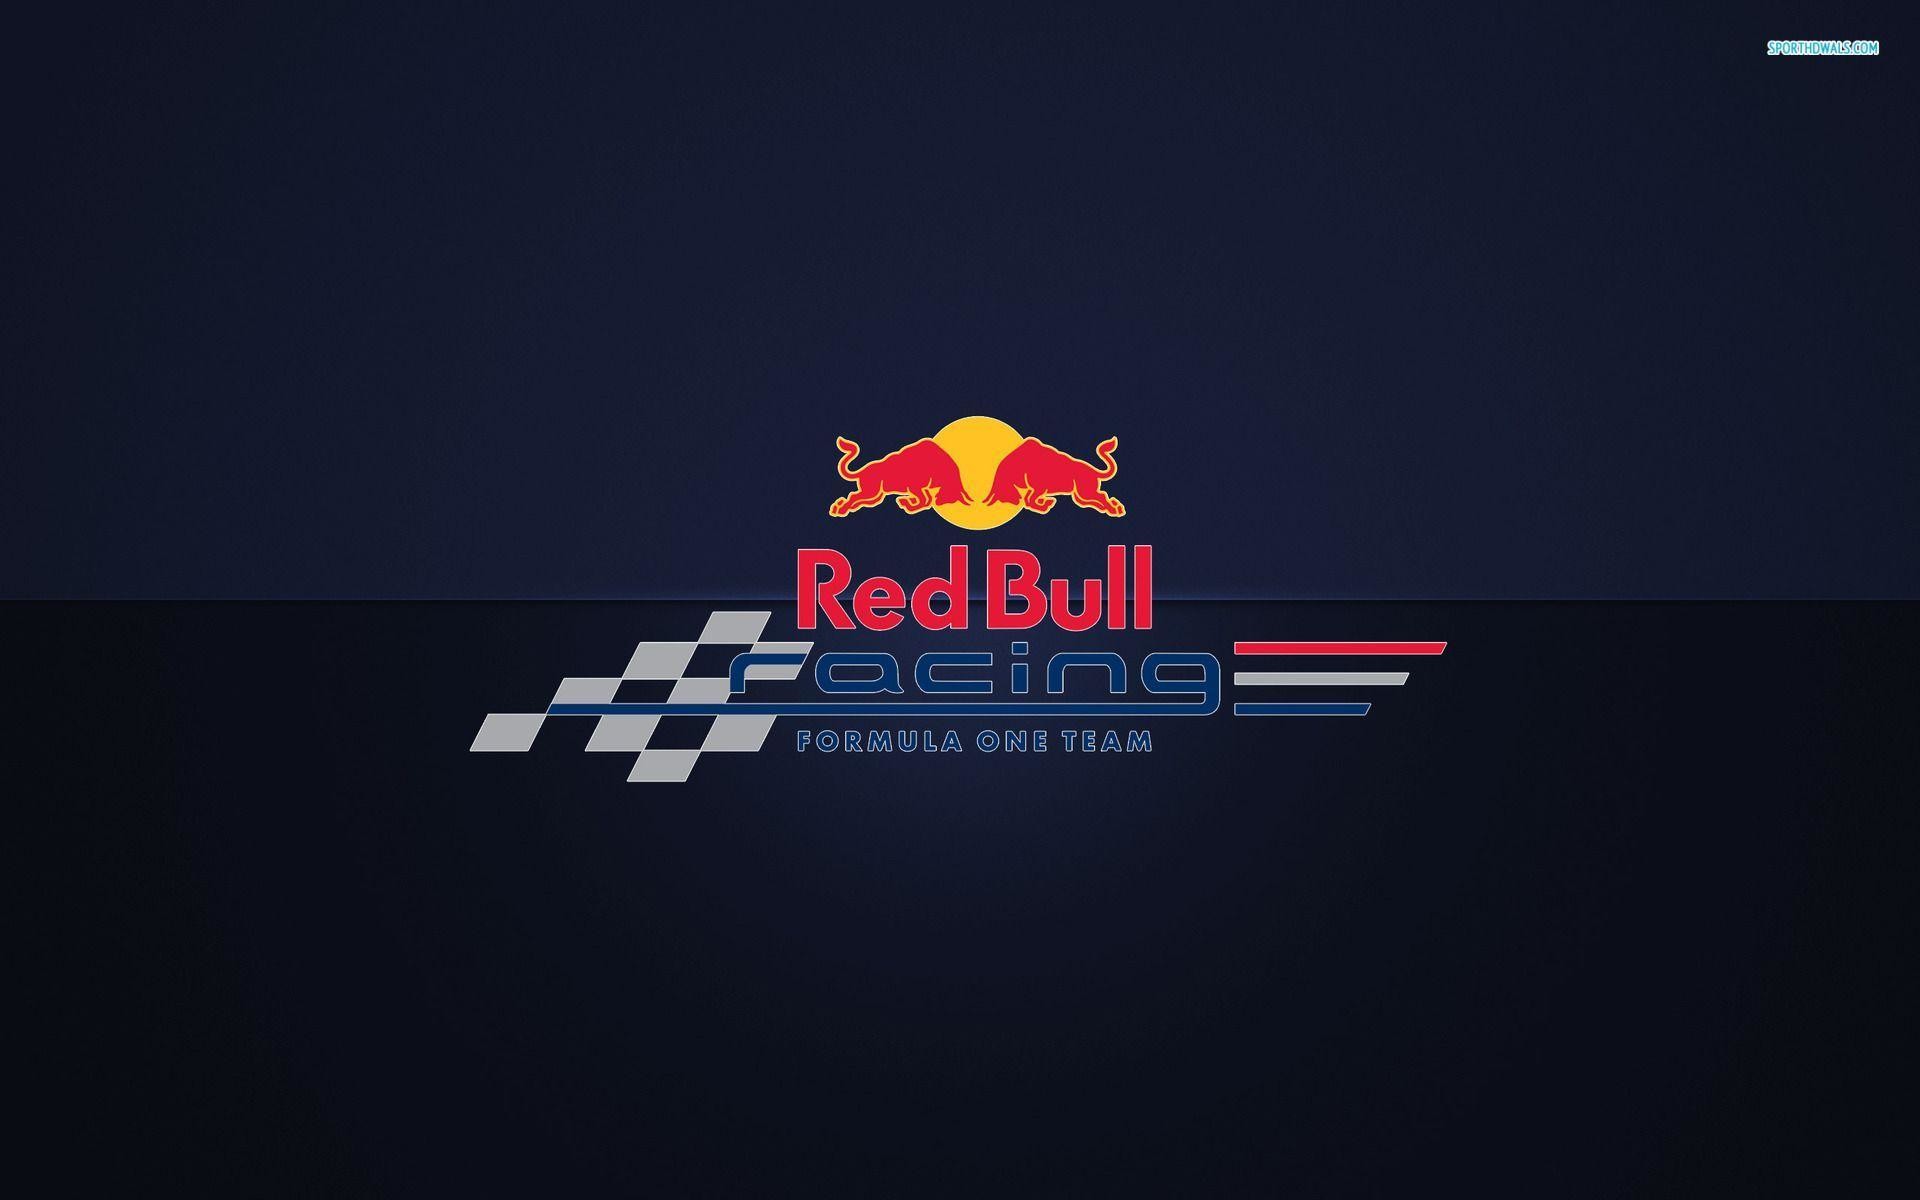 Free Red Bull Wallpaper Downloads 200 Red Bull Wallpapers for FREE   Wallpaperscom